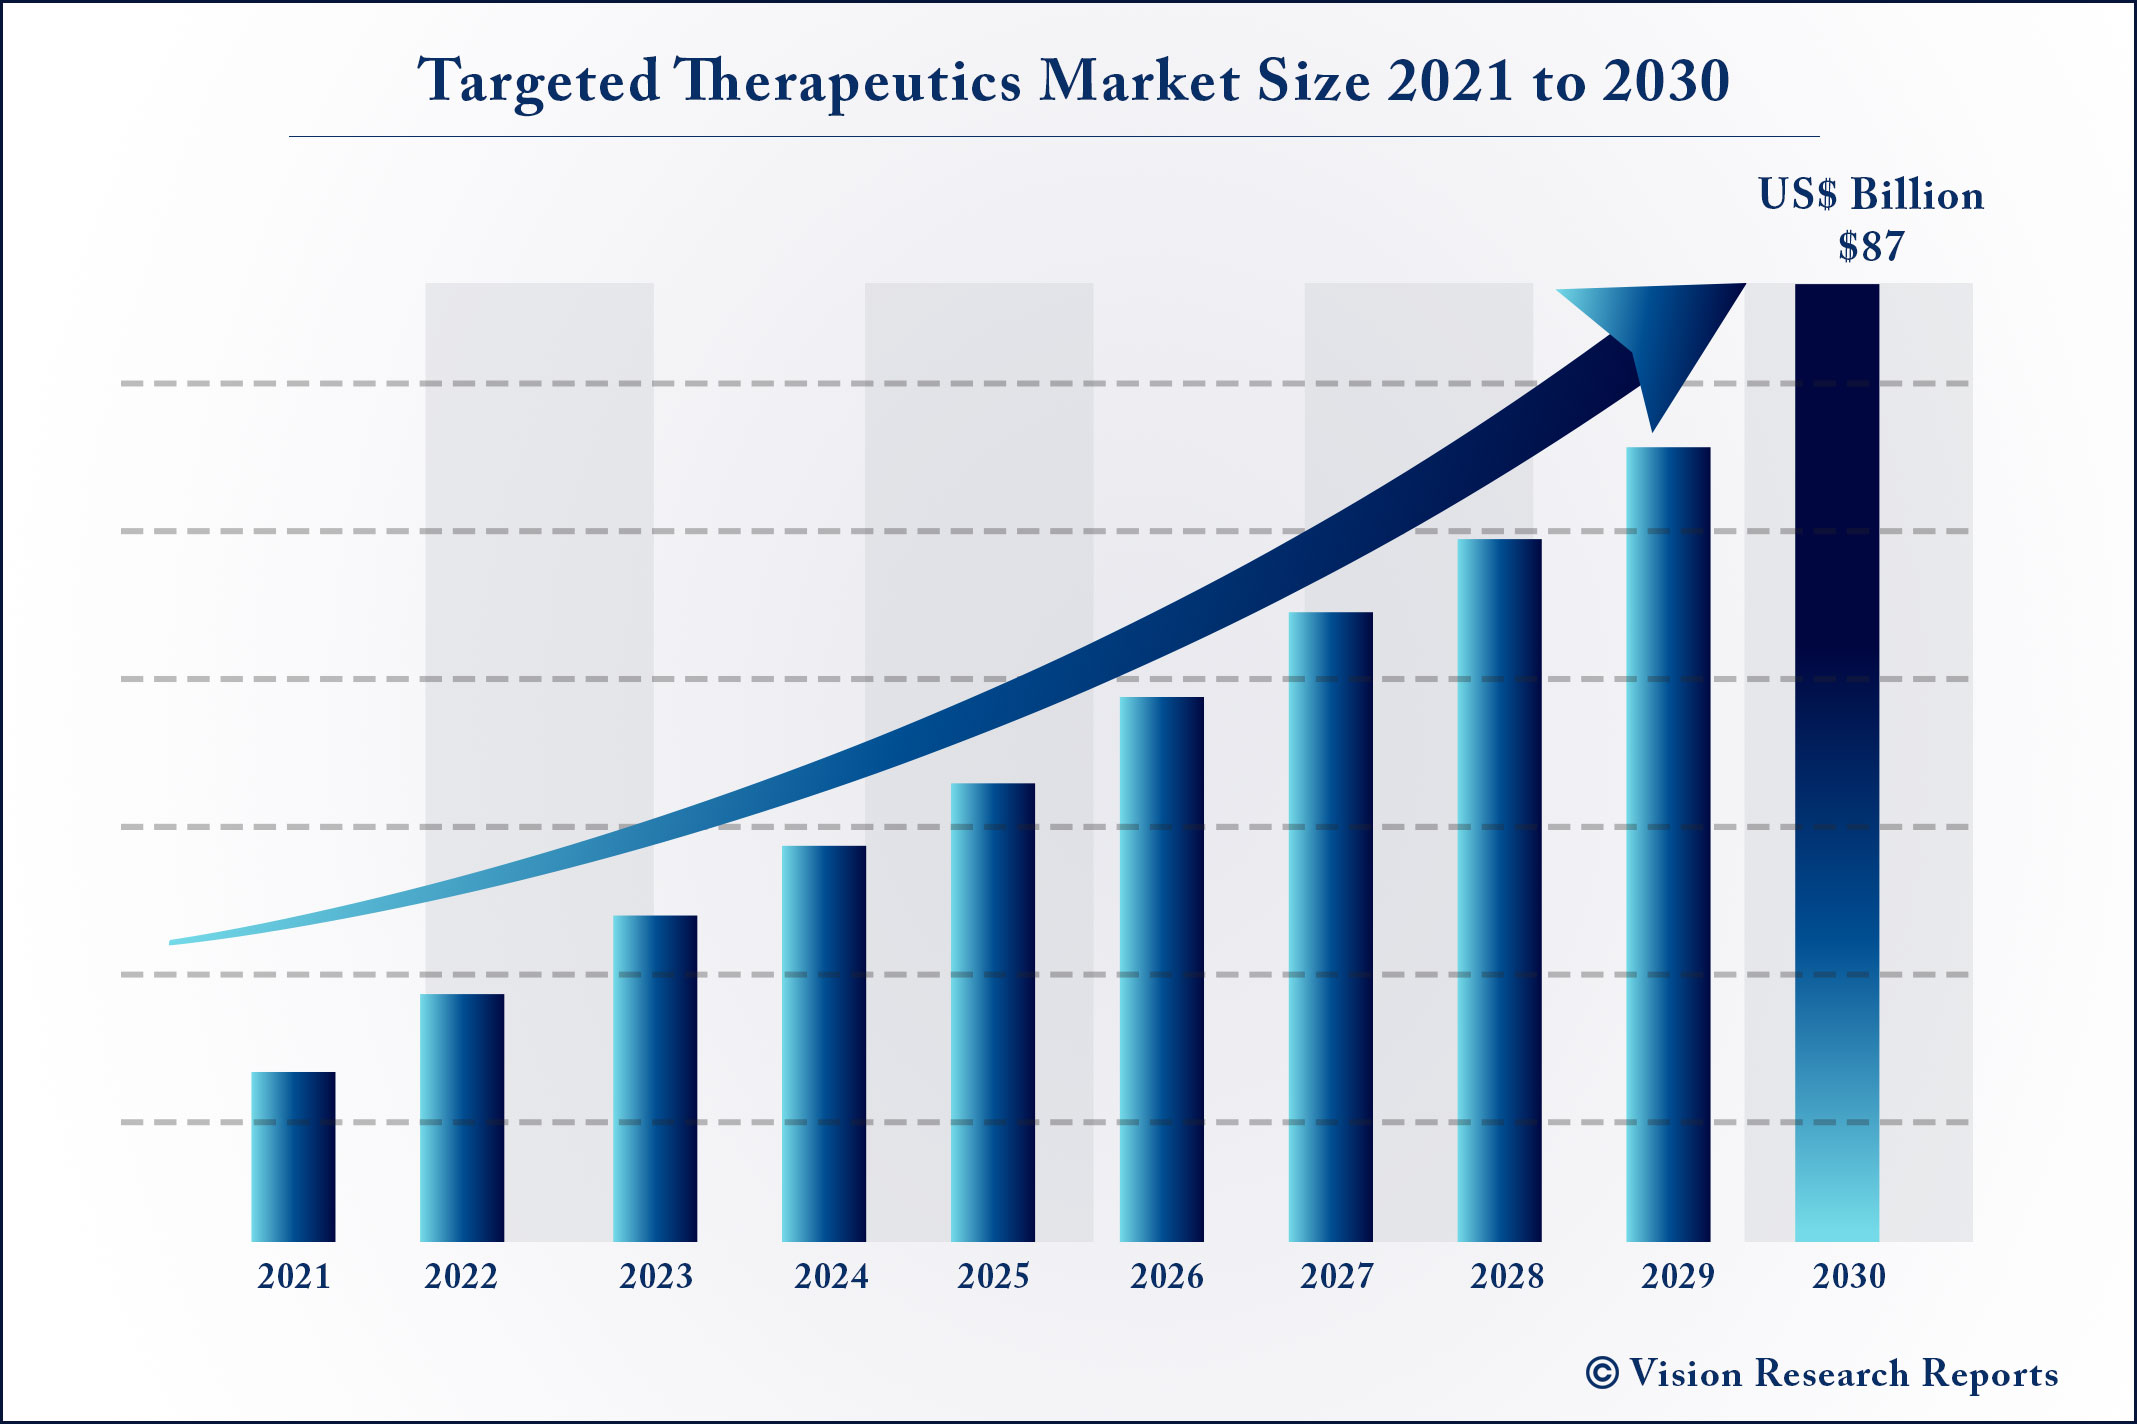 Targeted Therapeutics Market Size 2021 to 2030